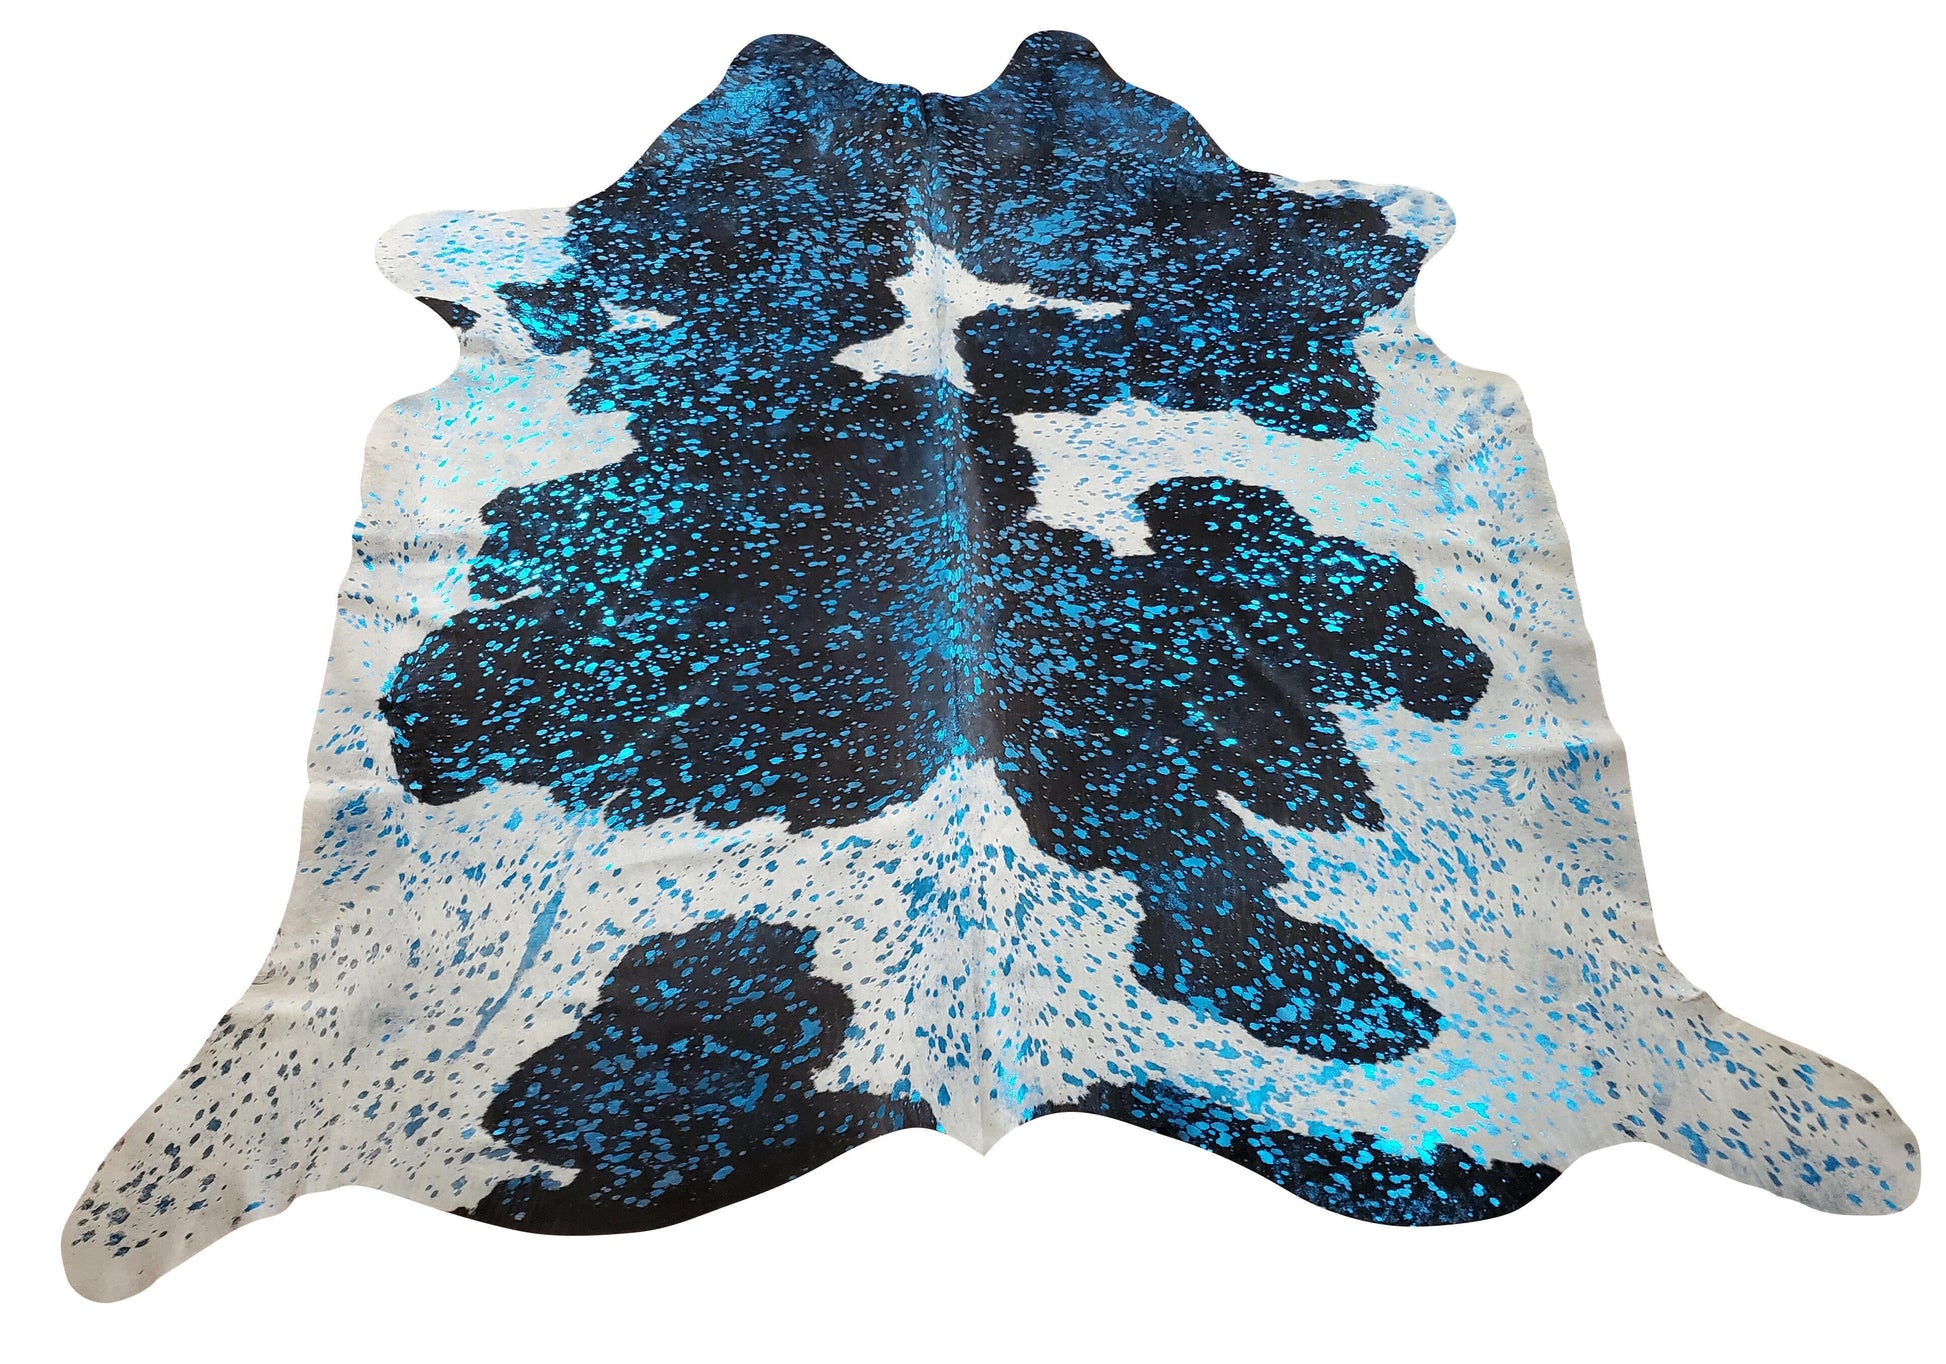 The colours of this cowhide rug is perfect for any modern or boho space and were very accurate to the photos.